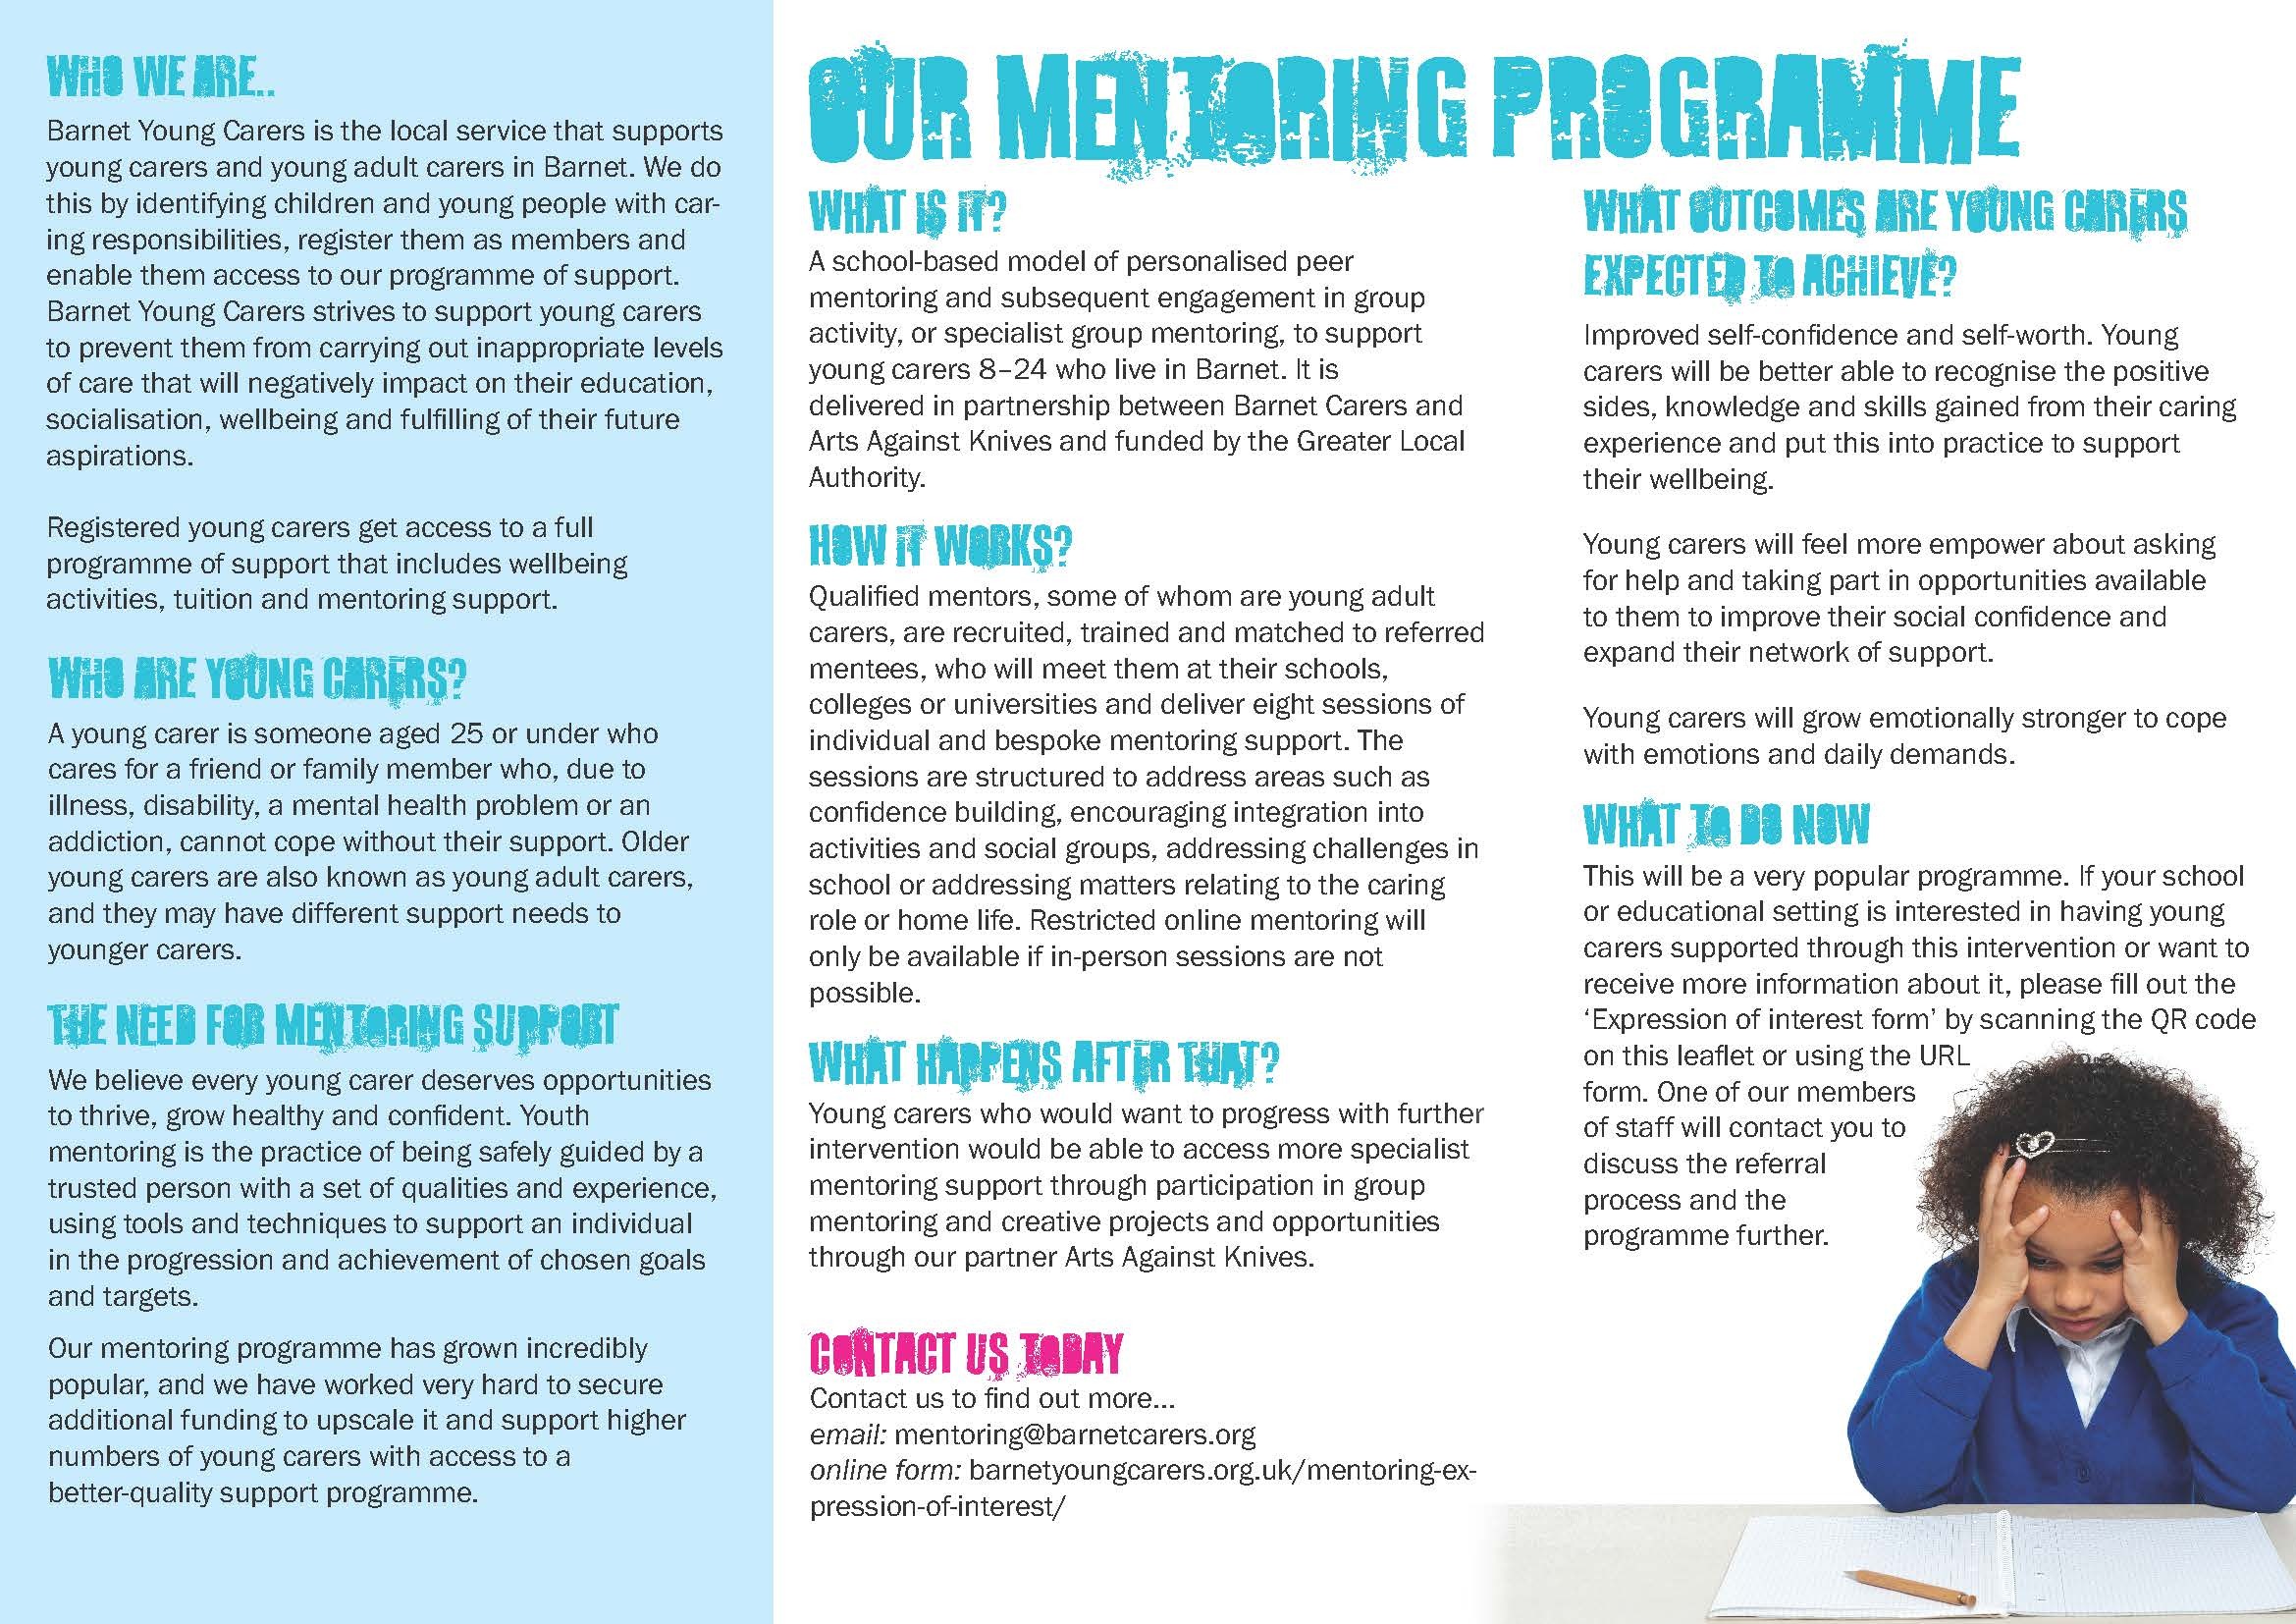 Mentoring programme for young carers vmr1 for website 1 page 2